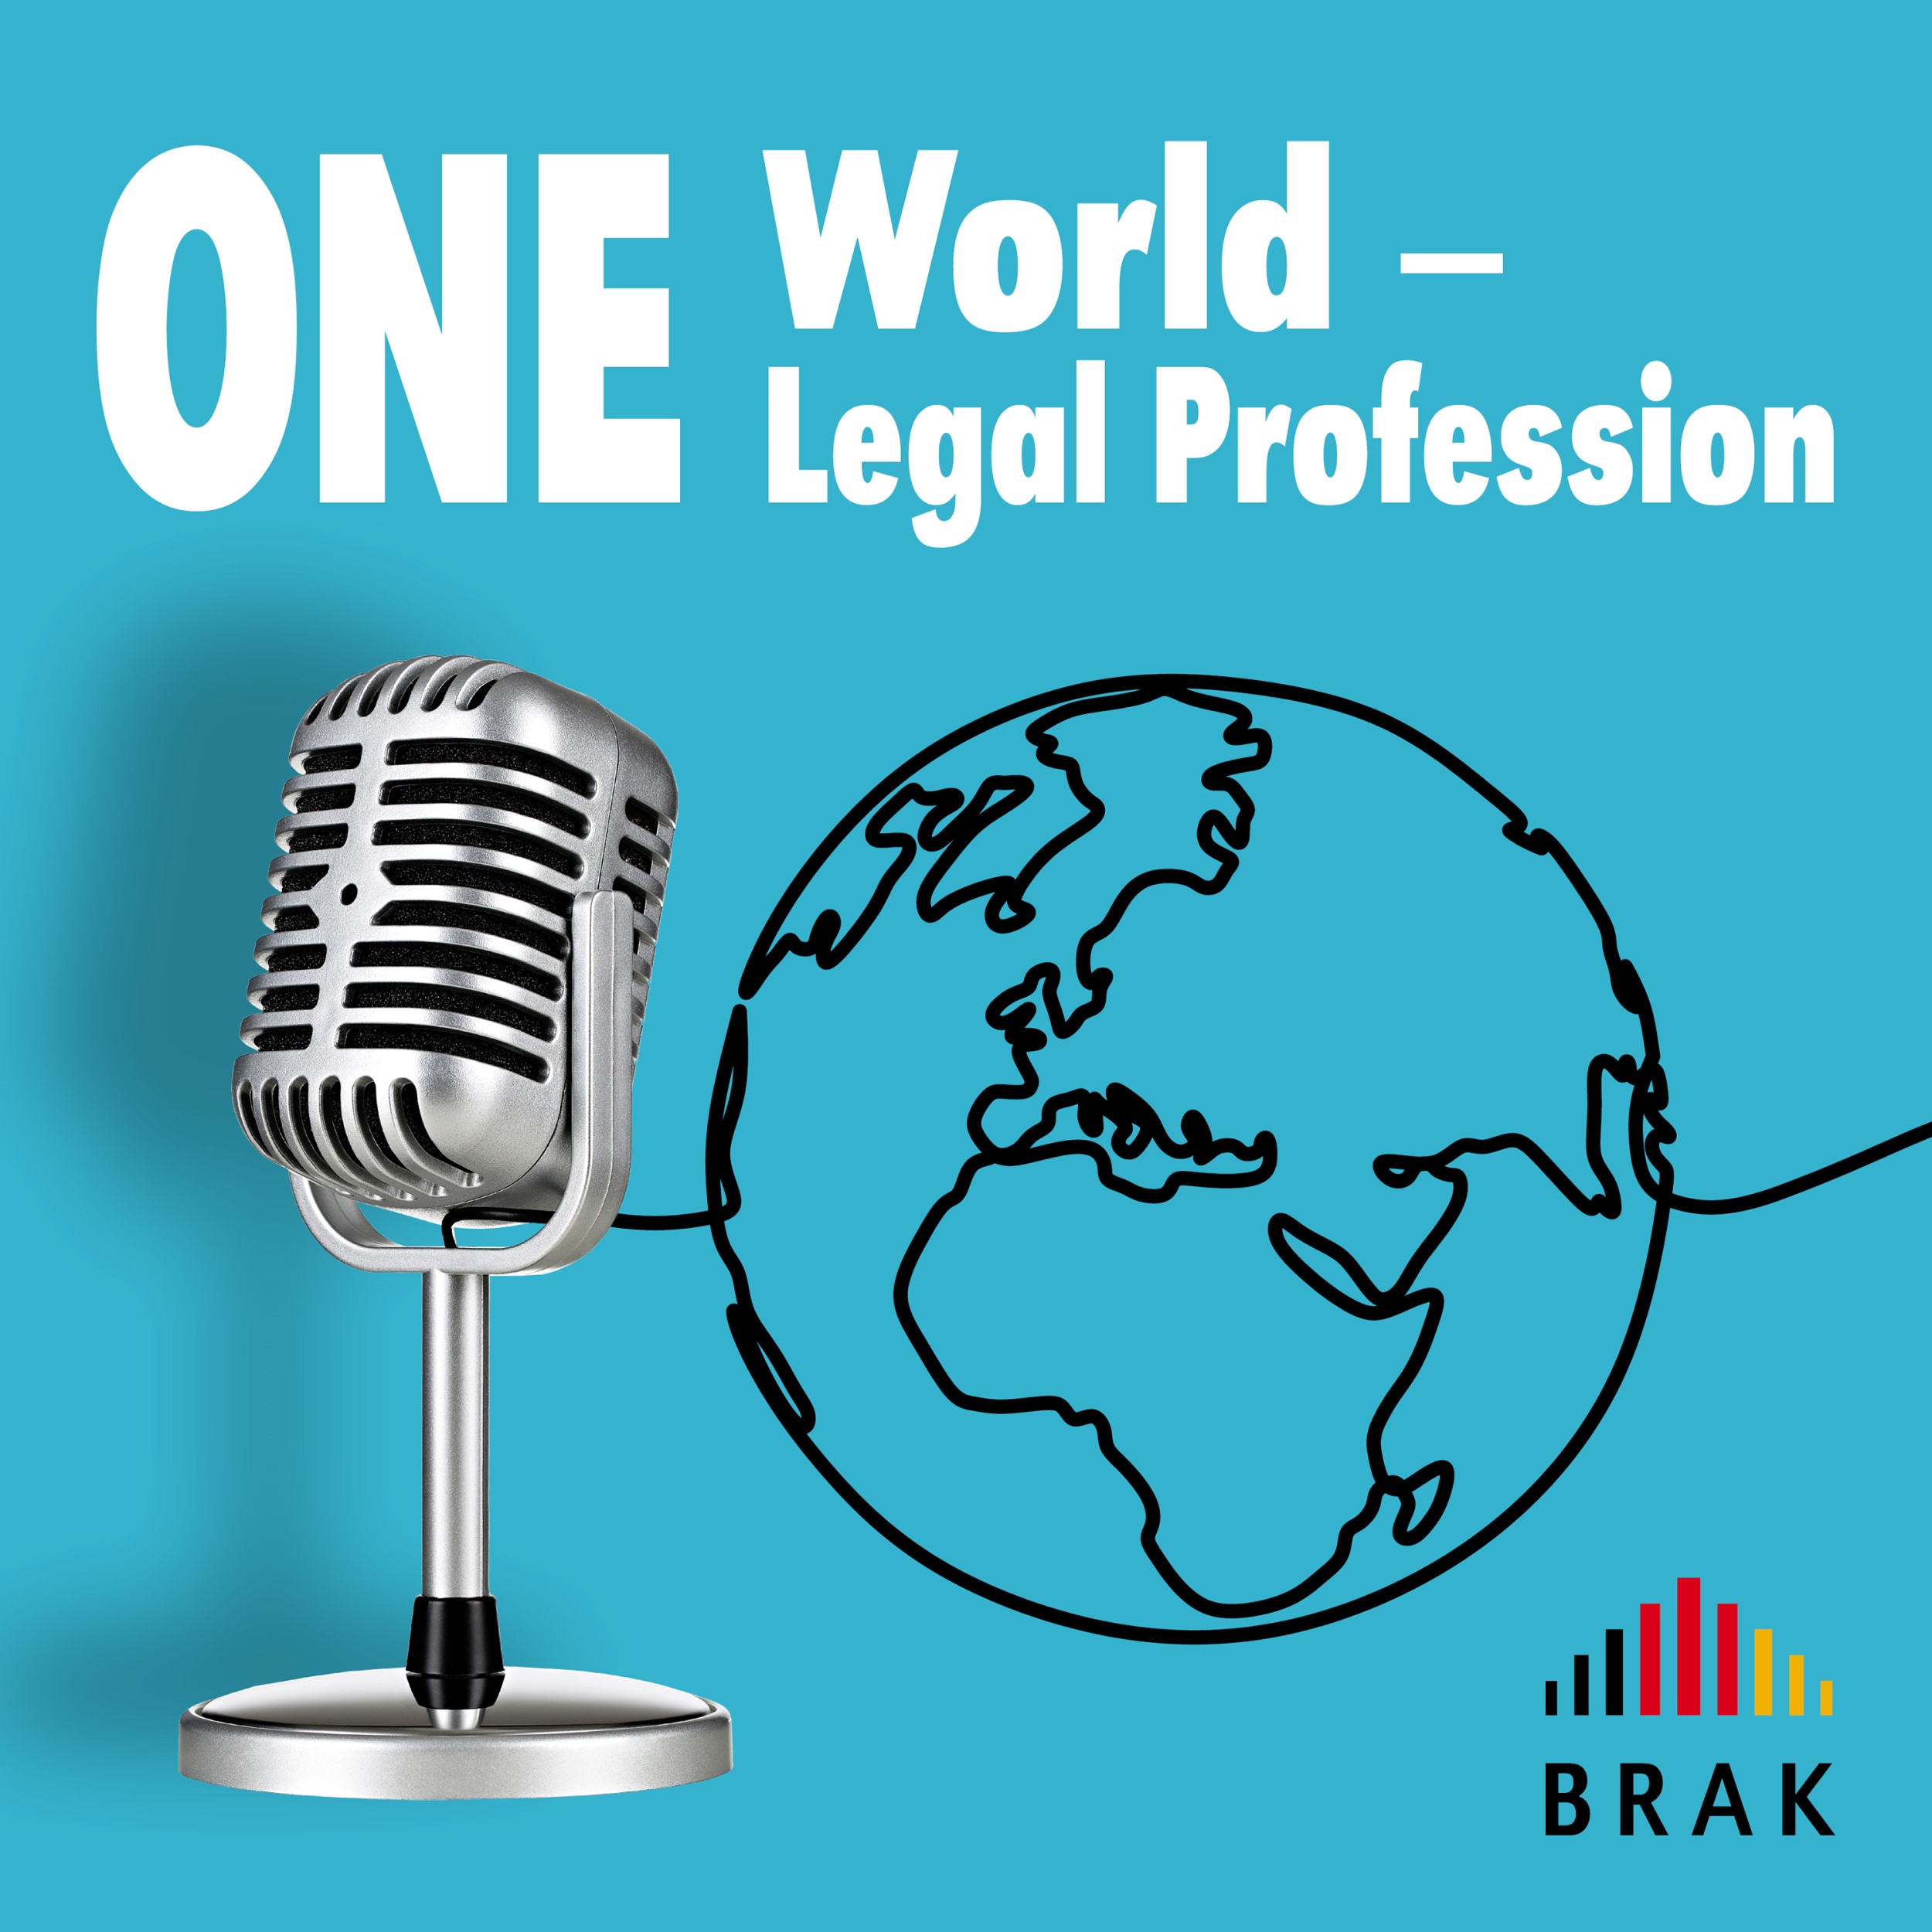 One World - One Legal Profession